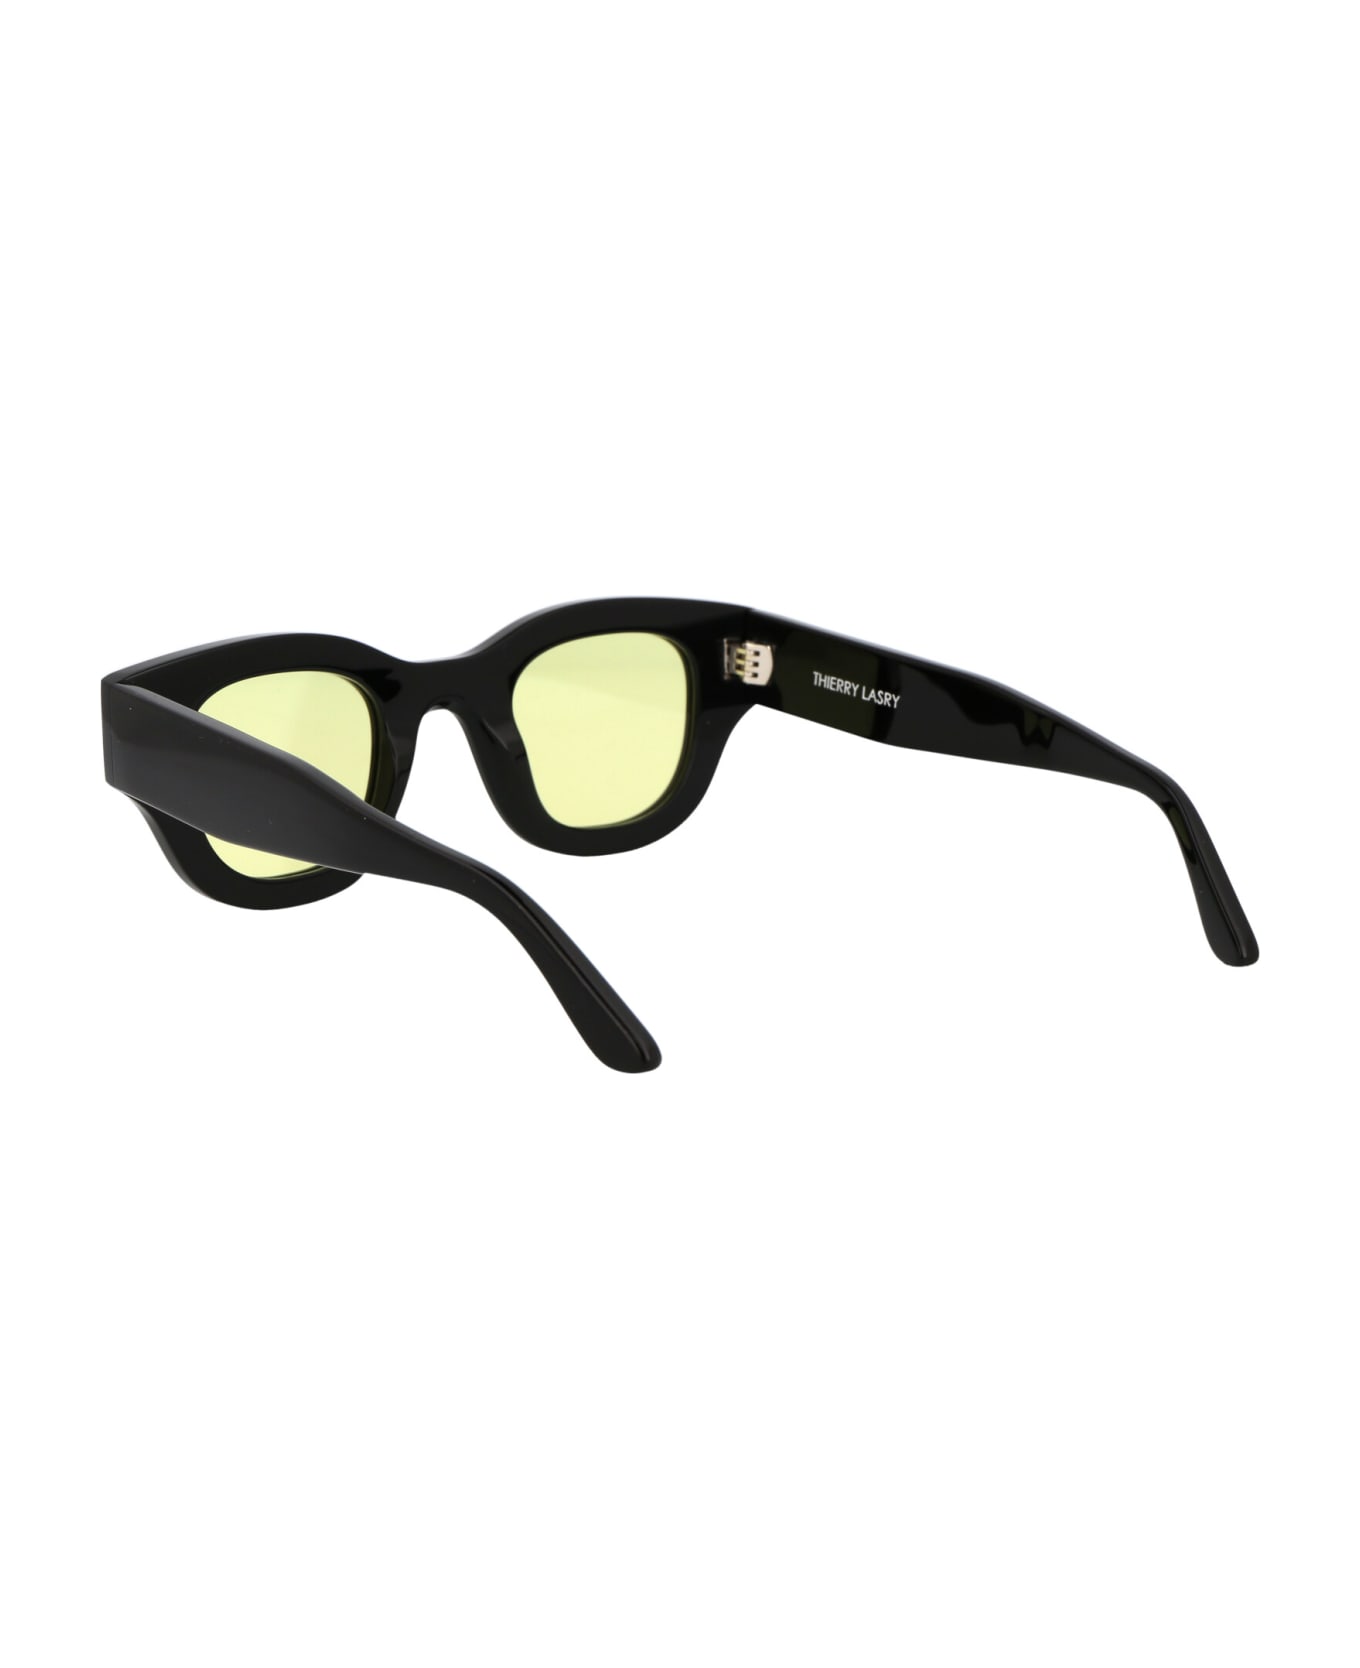 Thierry Lasry Autocracy Sunglasses - 101 YELLOW